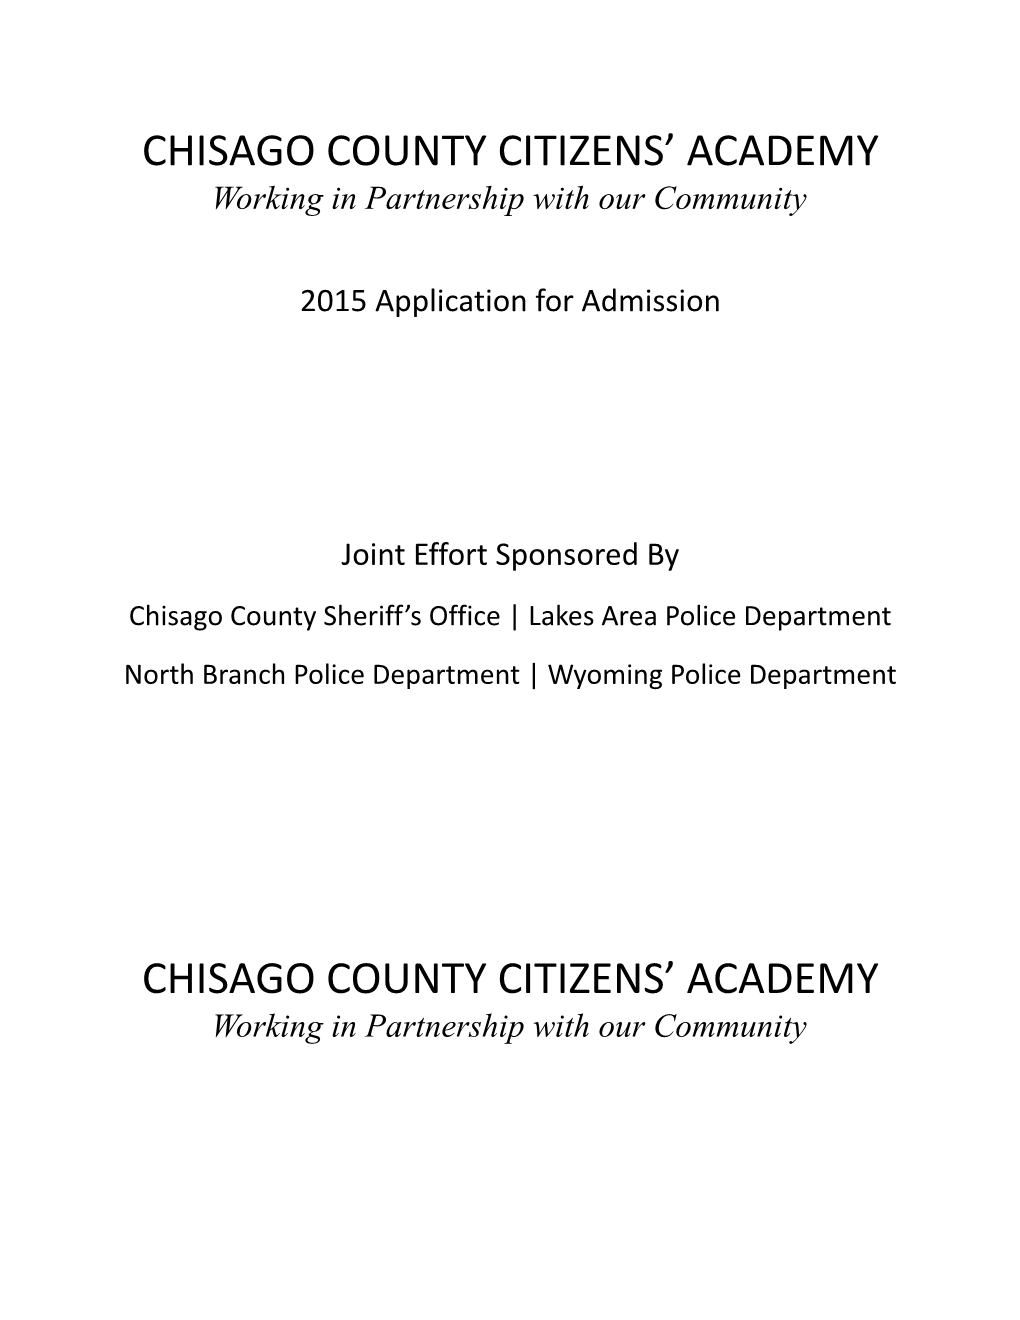 Chisago County Citizens Academy